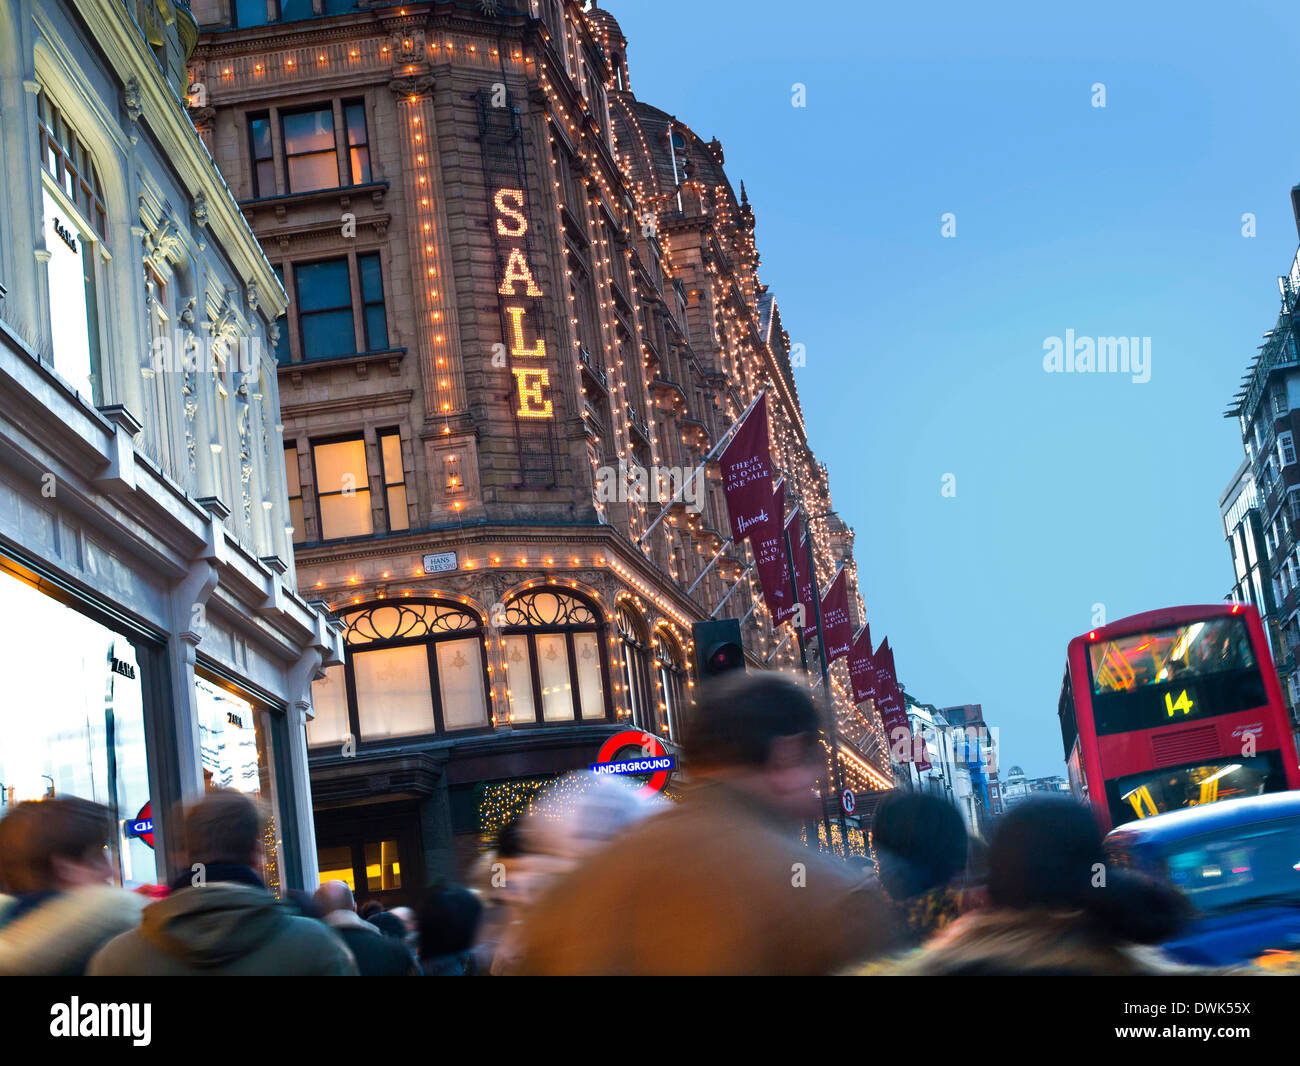 Harrods department store at dusk with lit 'Sale' sign and crowds of shoppers taxi and red bus Knightsbridge London SW1 Stock Photo